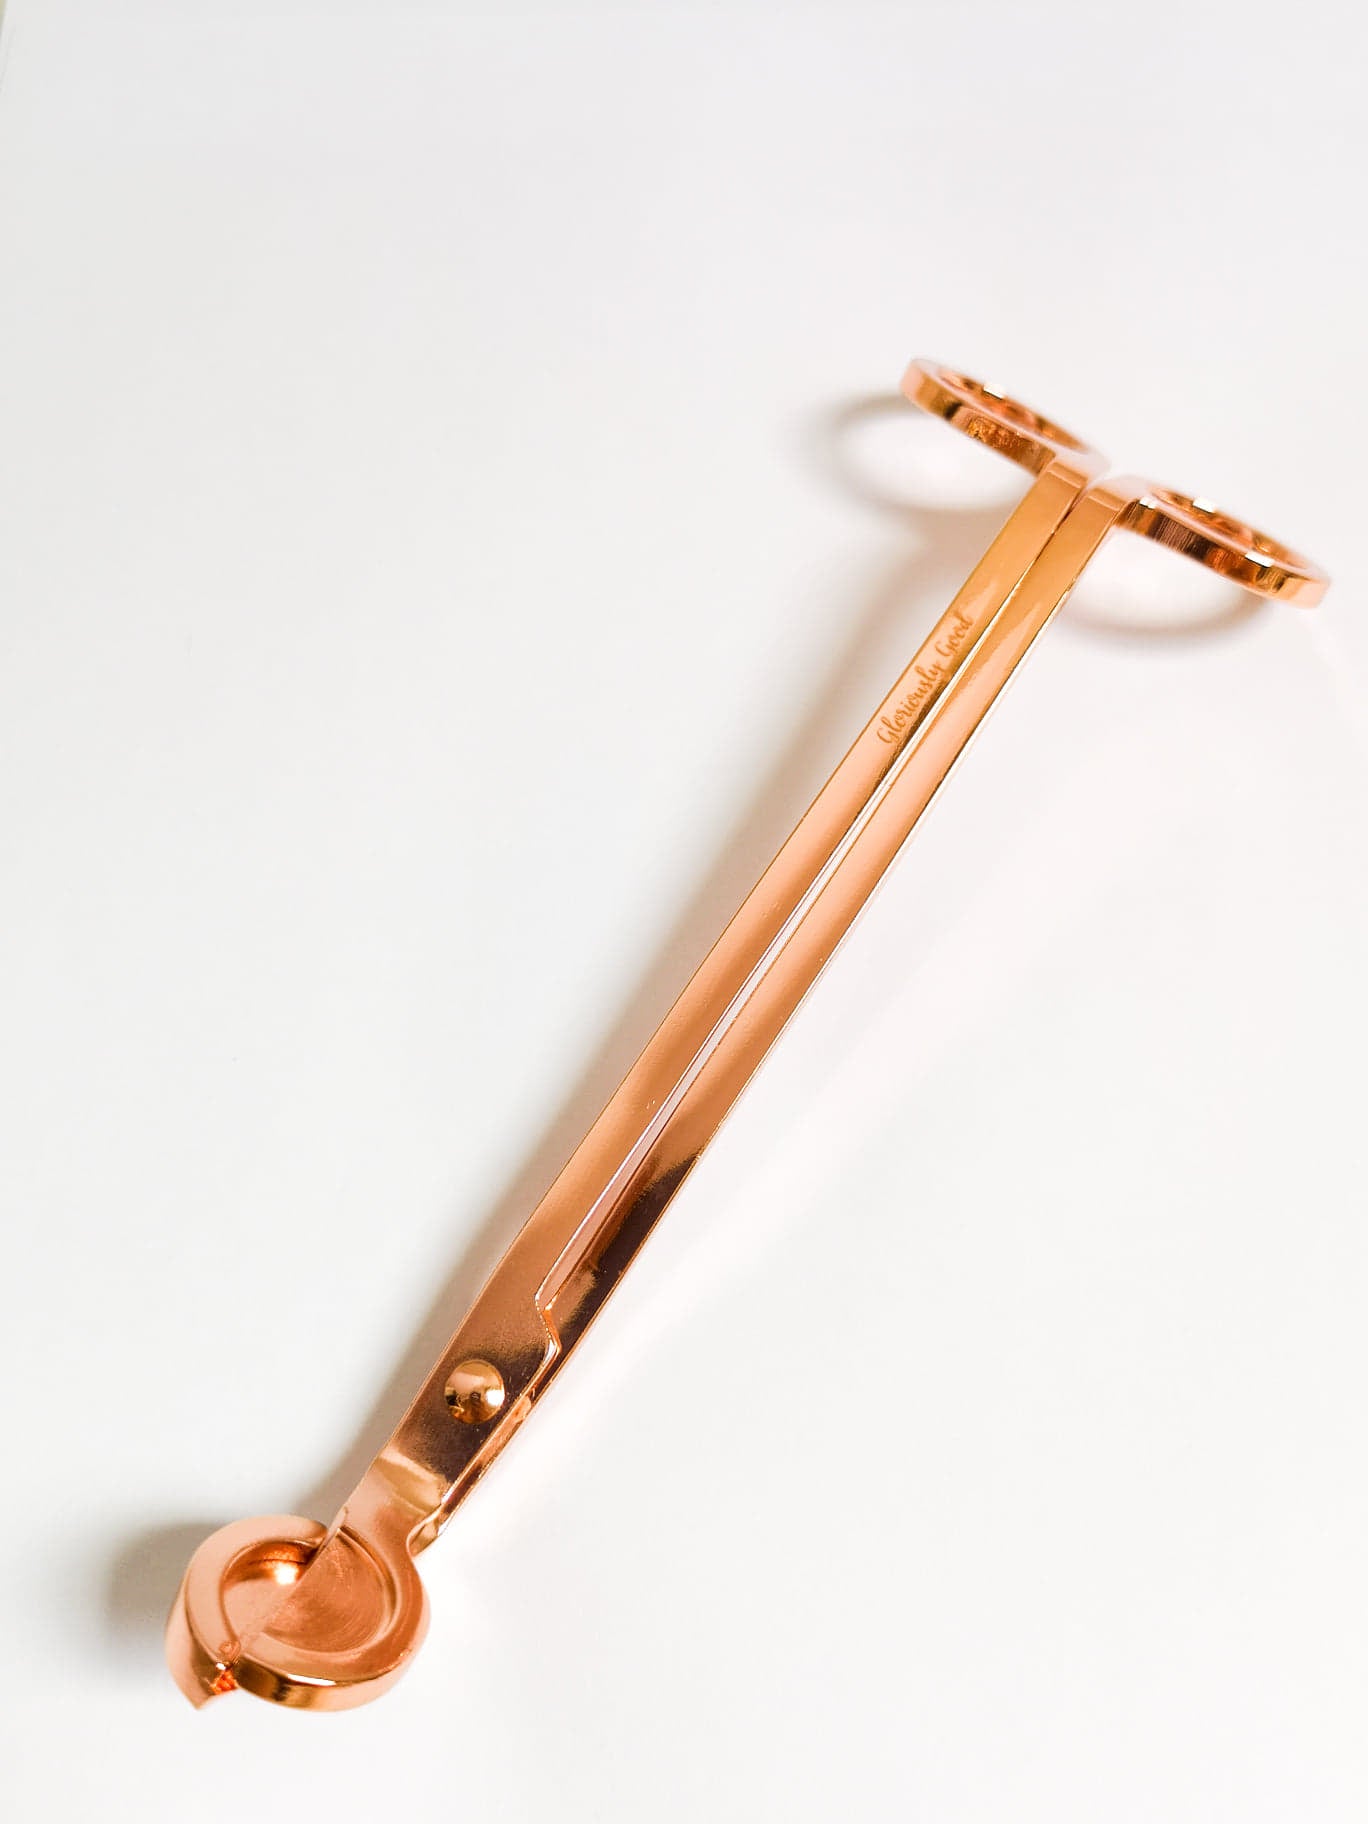 Rose gold wick trimmer made of coated stainless steel with Gloriously Good logo, standard size